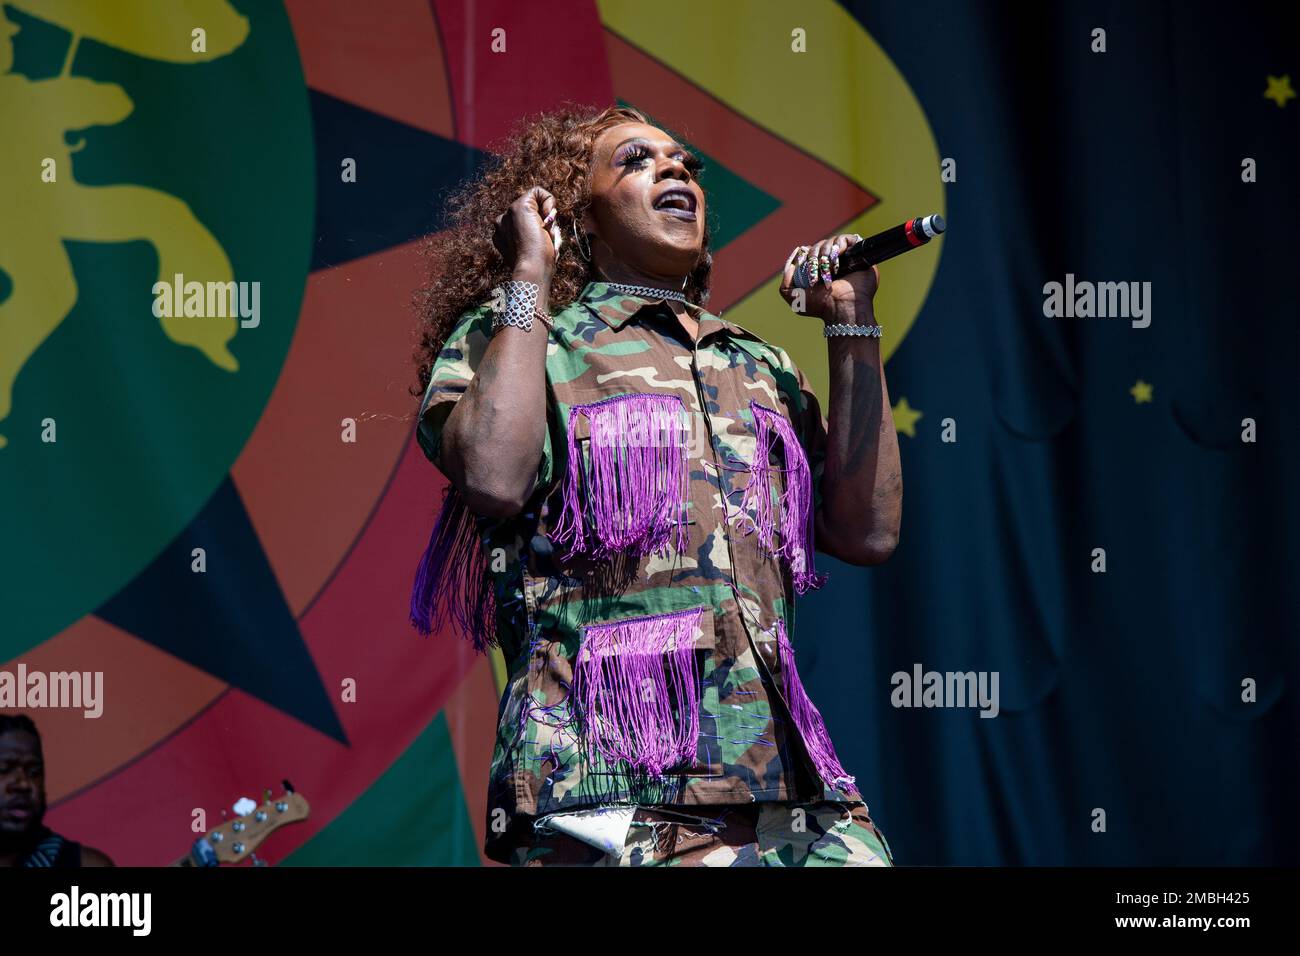 Big Freedia performs at the New Orleans Jazz and Heritage Festival, on